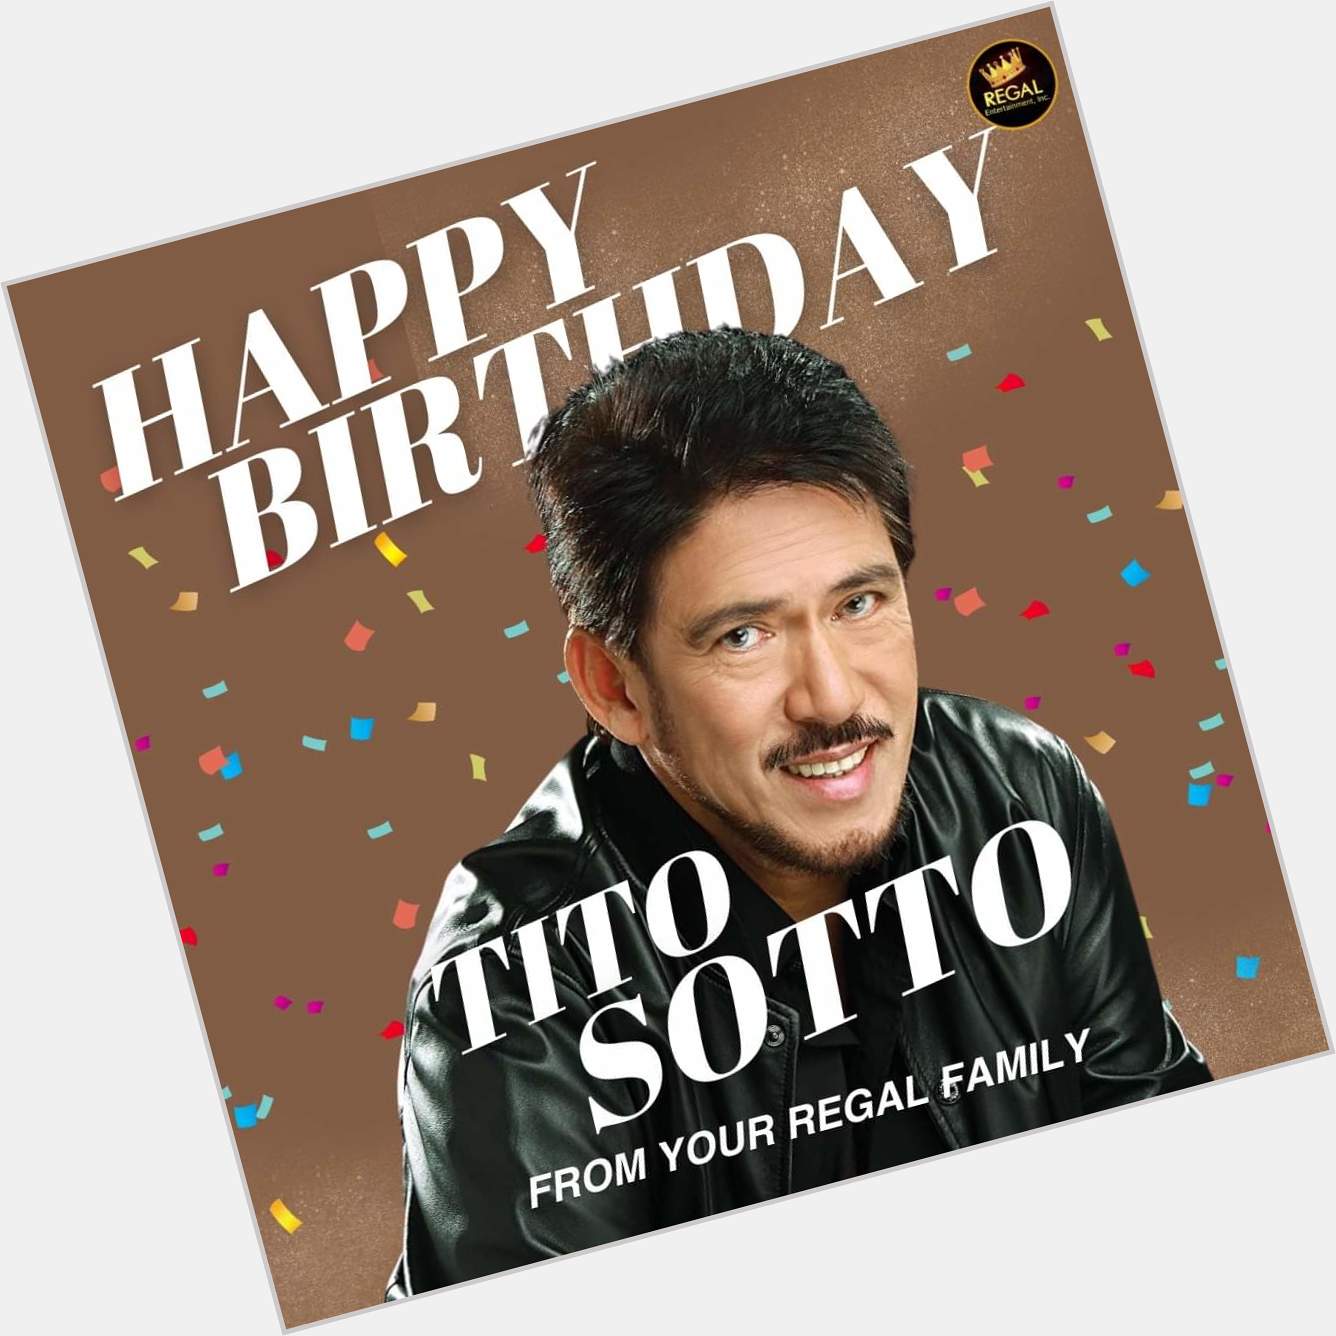 Happy Birthday Tito Sotto! We wish you all the best in life! From your Regal Family!    